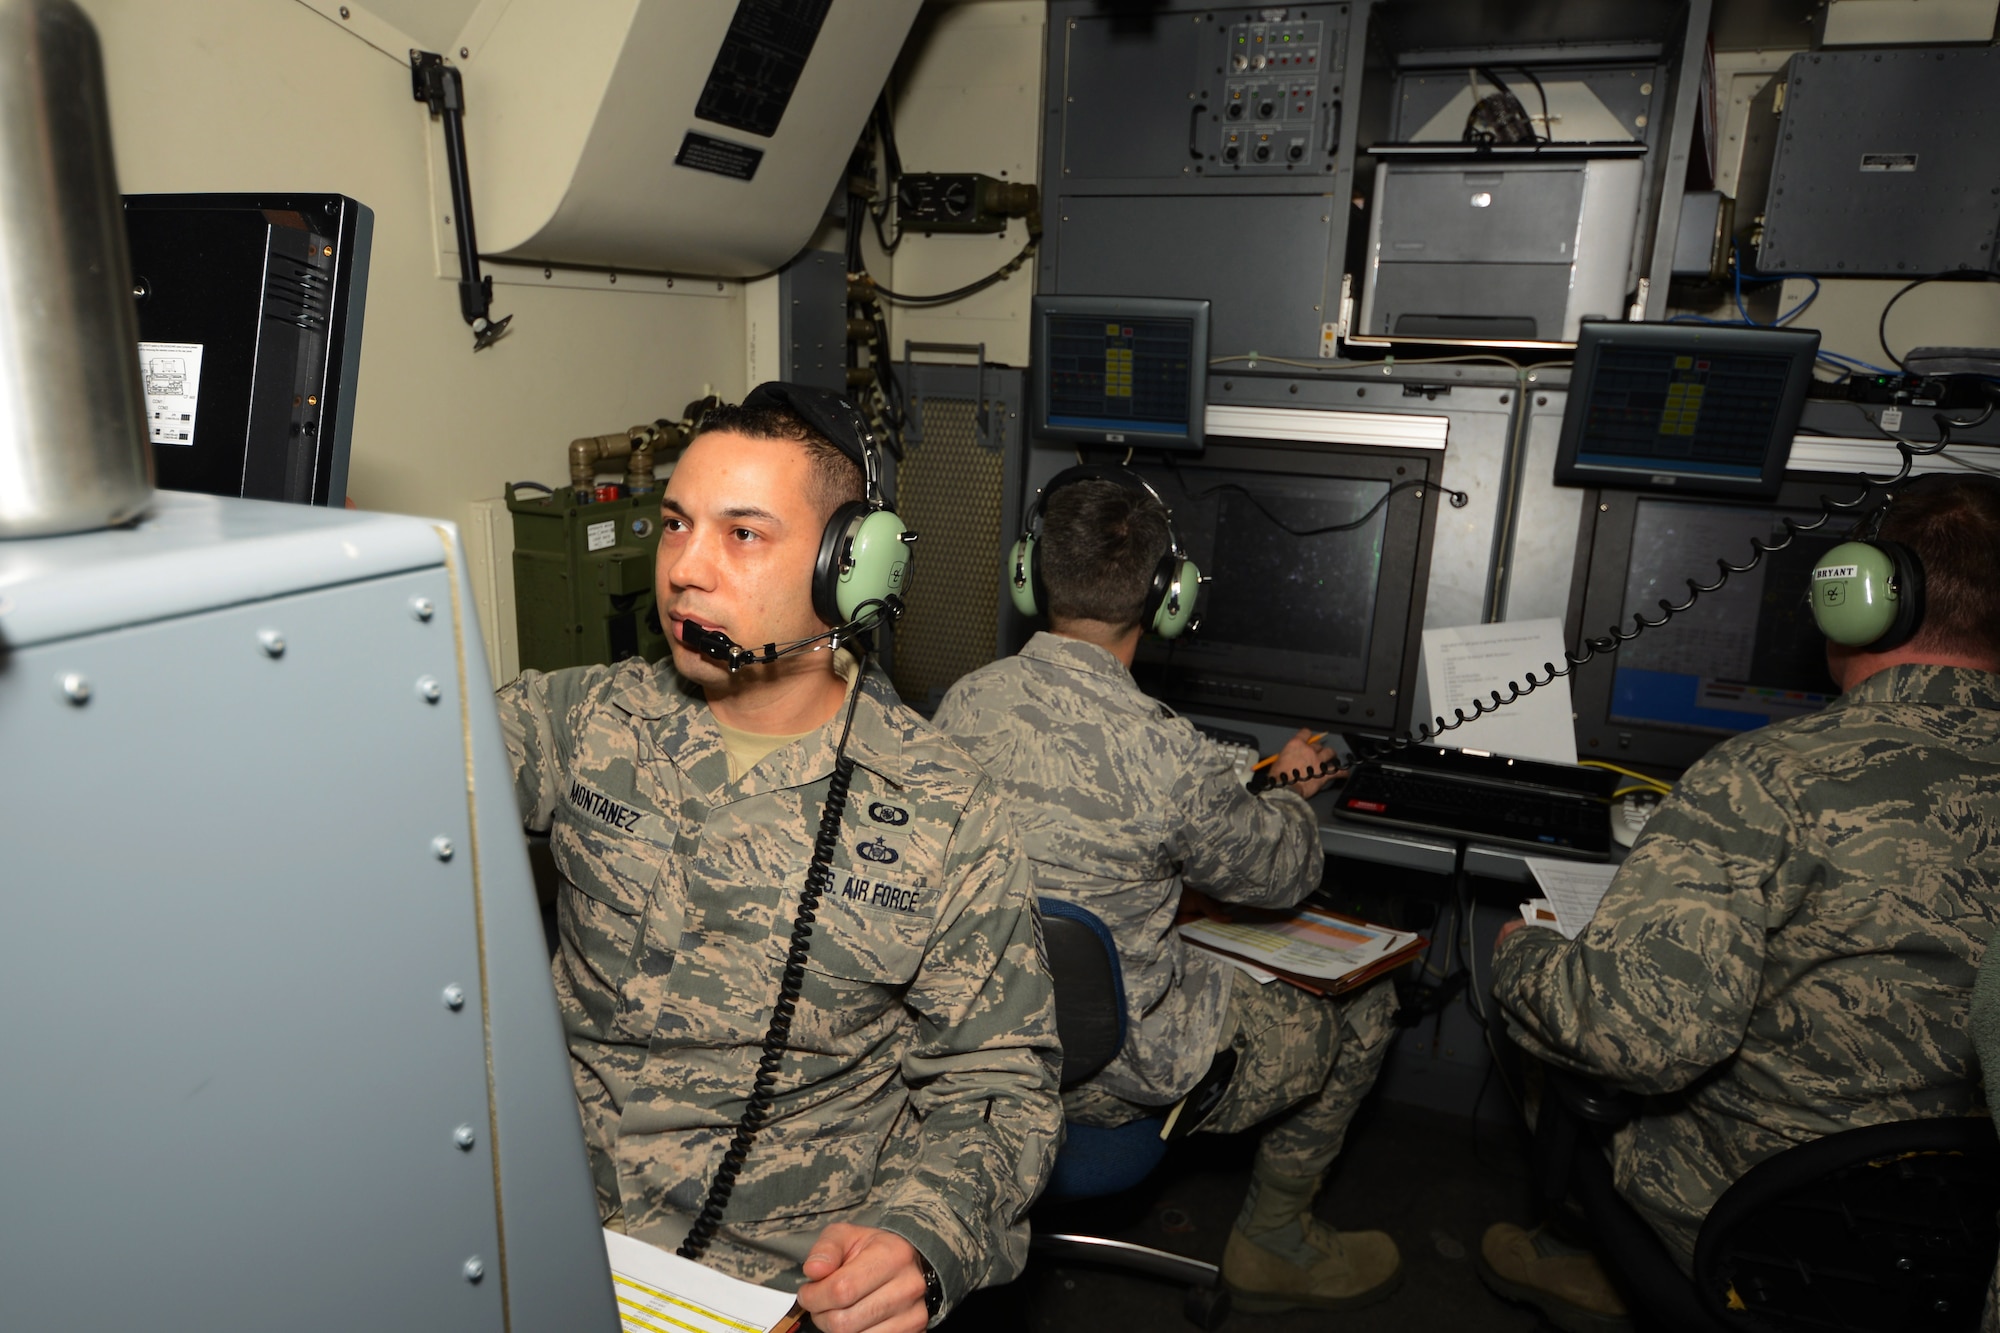 Tech. Sgt. Manny Montanez, weapons director with the 103rd Air Control Squadron, coordinates with air traffic during a training exercise at the Orange Air National Guard Station, Orange, Conn., April 5, 2014. Montanez works inside one of the operations modules there as he communicates with pilots during the exercise. (U.S. Air National Guard photo by Senior Airman Jennifer Pierce)